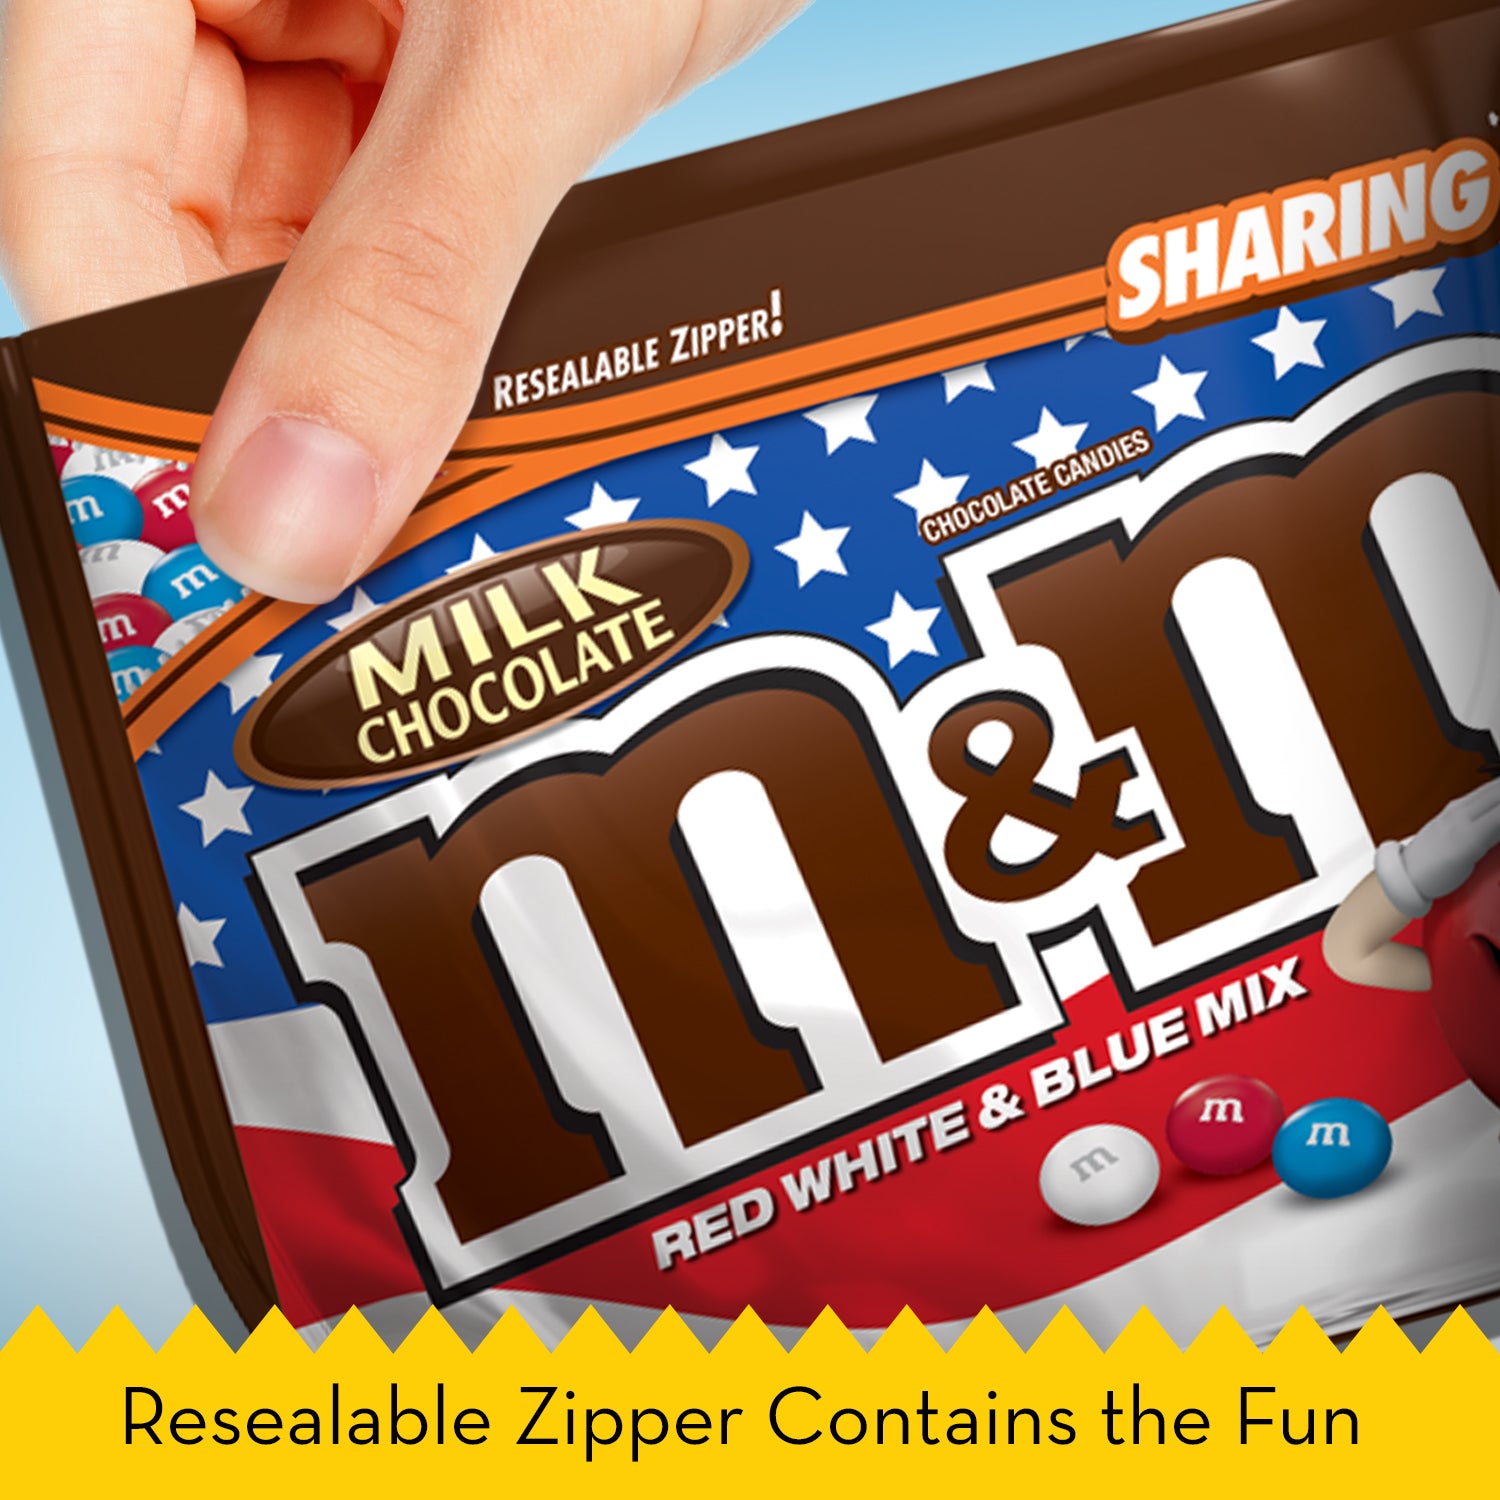 M&M's Red, White & Blue Mix, 10.70oz – Five and Dime Sweets